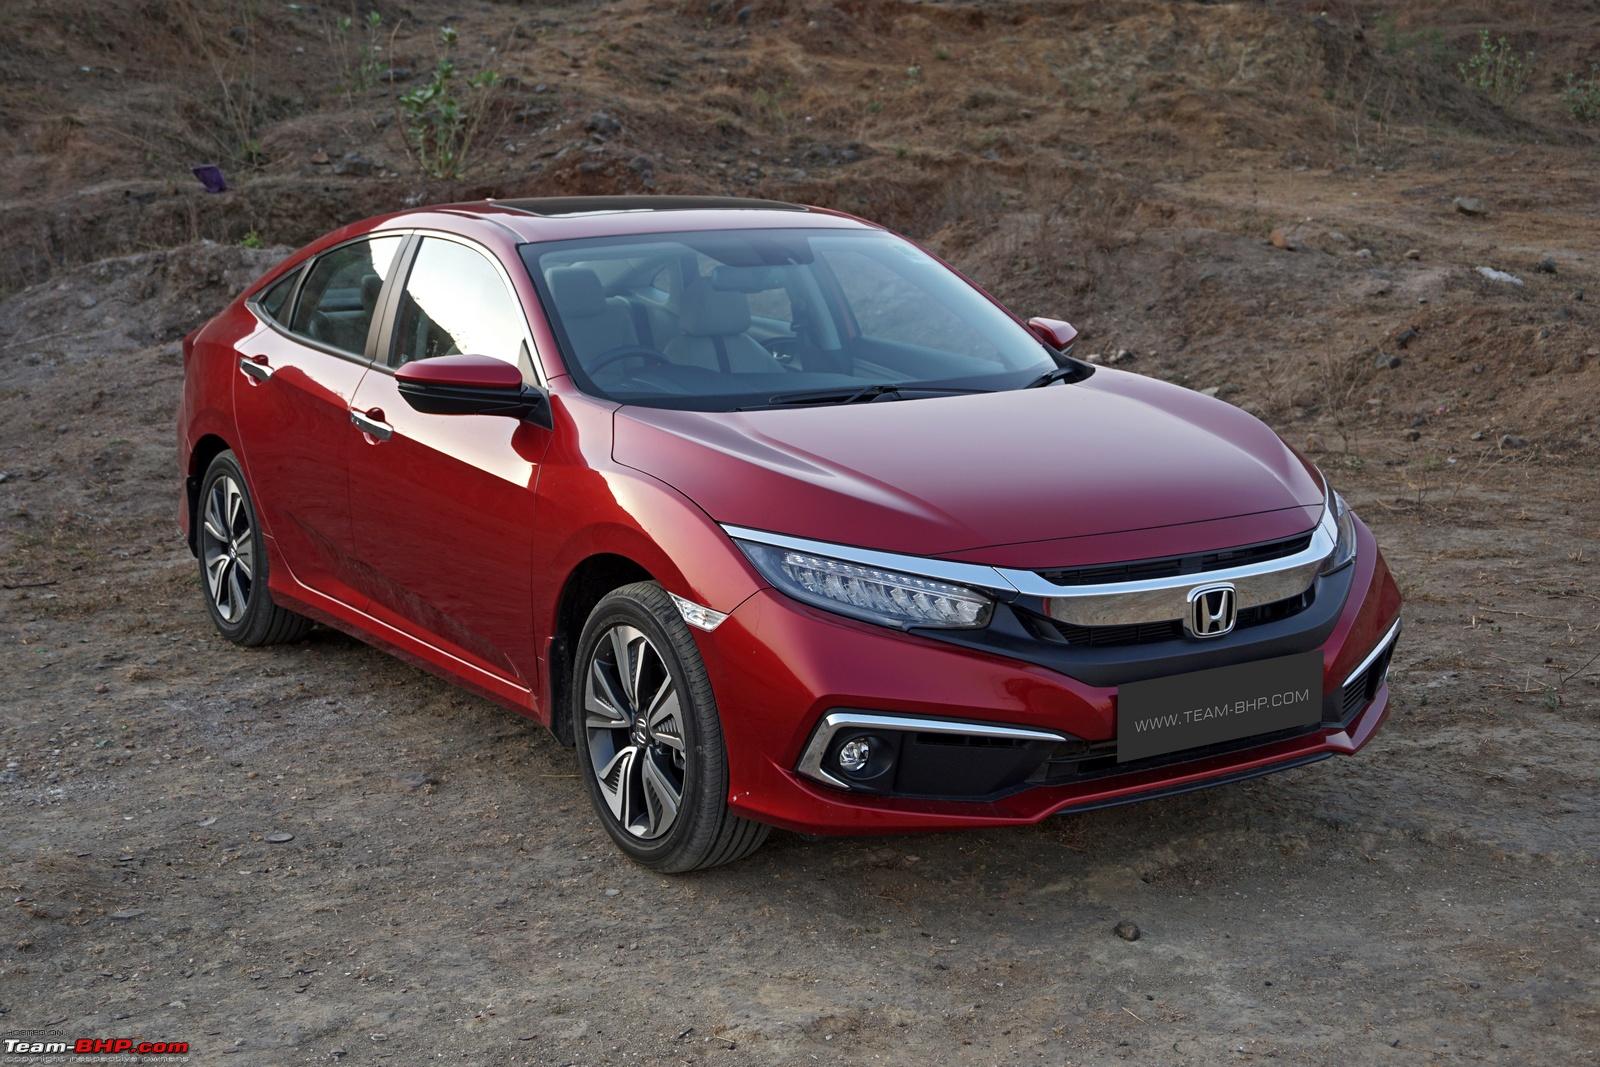 Honda Civic BS6 Diesel pre-bookings open. Edit: Launched at Rs. 20.75 lakh  - Team-BHP